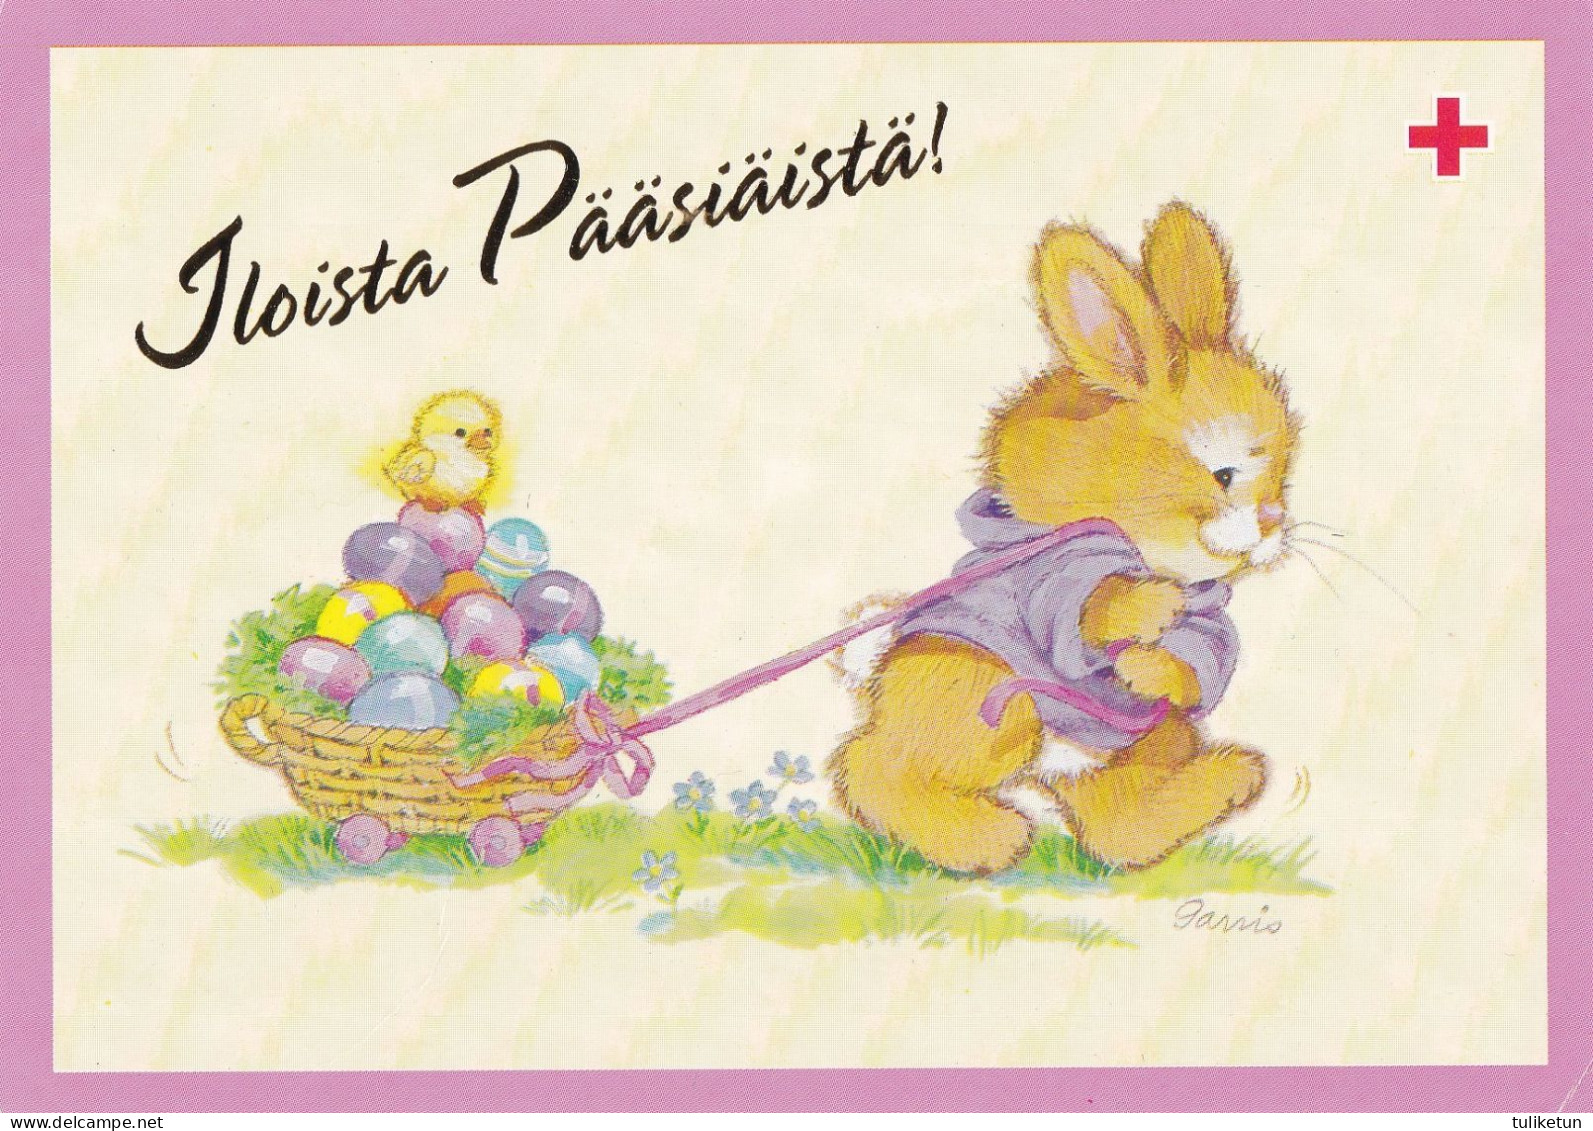 Postal Stationery - Bunny Pulling The Basket Full Of Eggs - Chick - Red Cross 1992 - Suomi Finland - Postage Paid - Postal Stationery